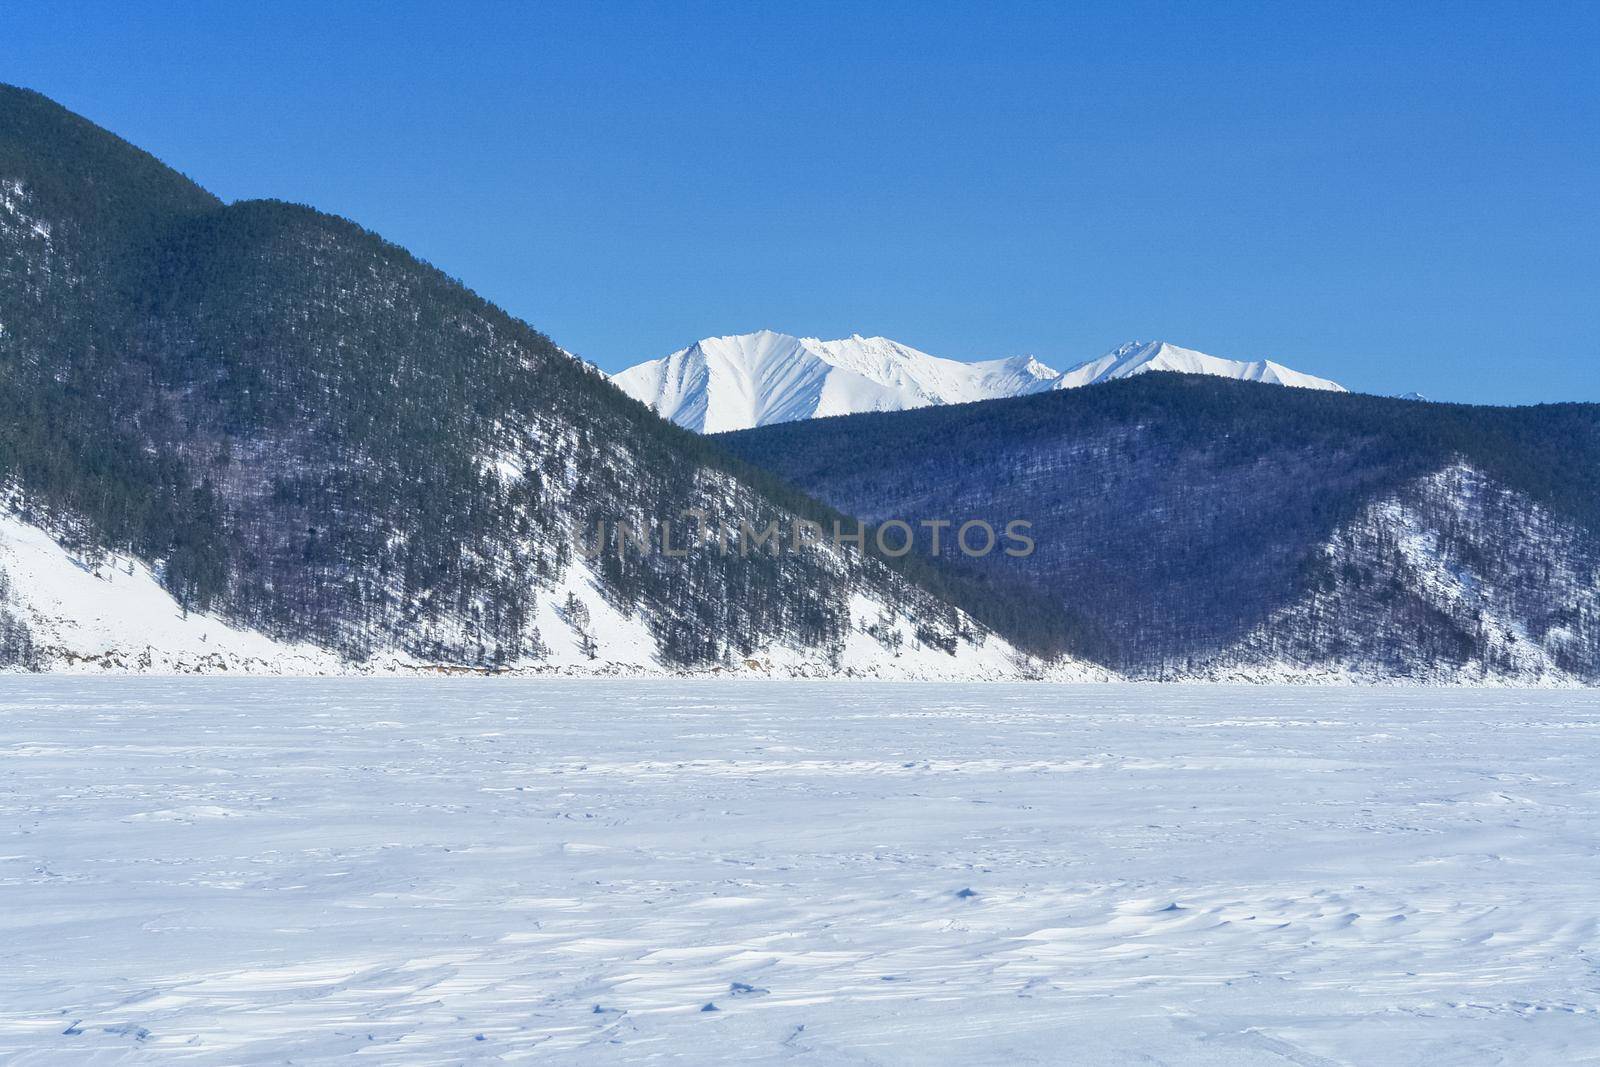 Baikal mountains in winter in snow. Forest in snow-covered mountains.